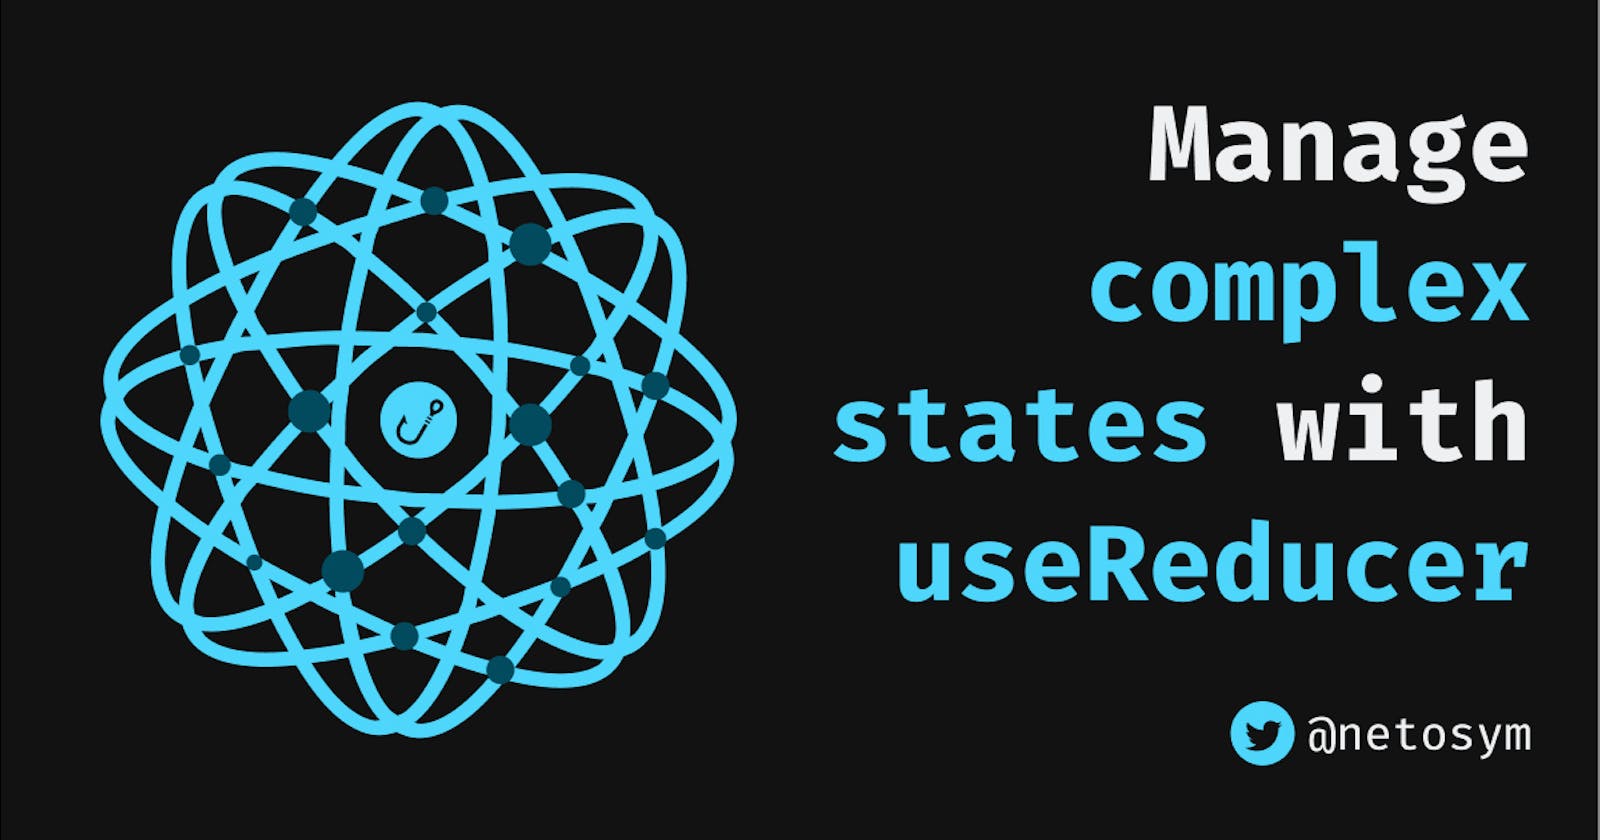 Manage complex states with useReducer